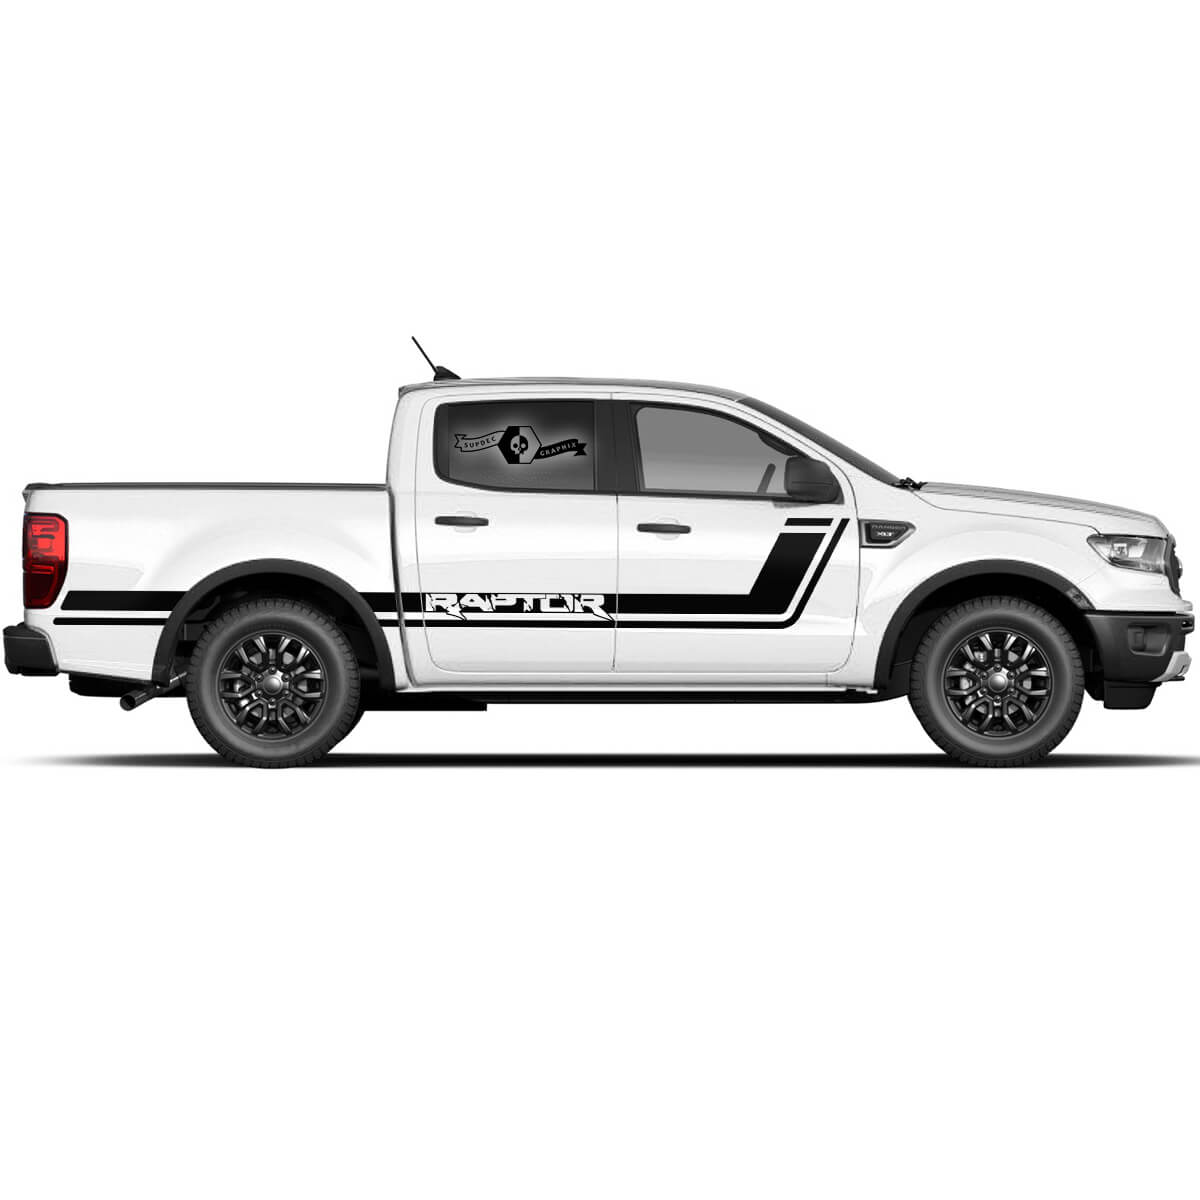 2x New Ford F150 Raptor 2022 Side Doors Stripe Bed Raptor Graphic Decal Sticker